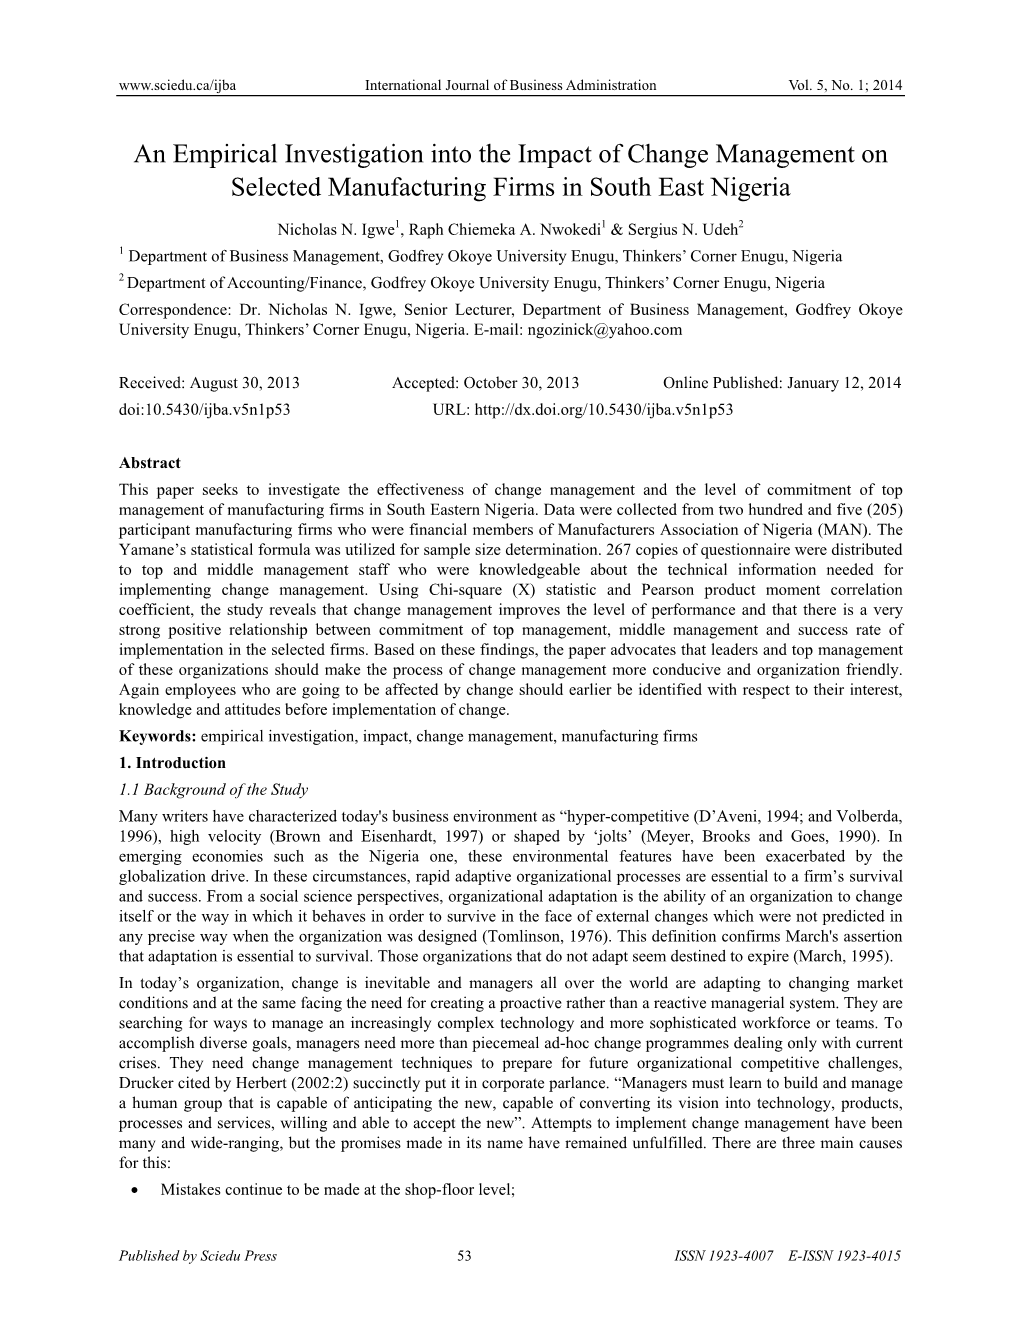 An Empirical Investigation Into the Impact of Change Management on Selected Manufacturing Firms in South East Nigeria